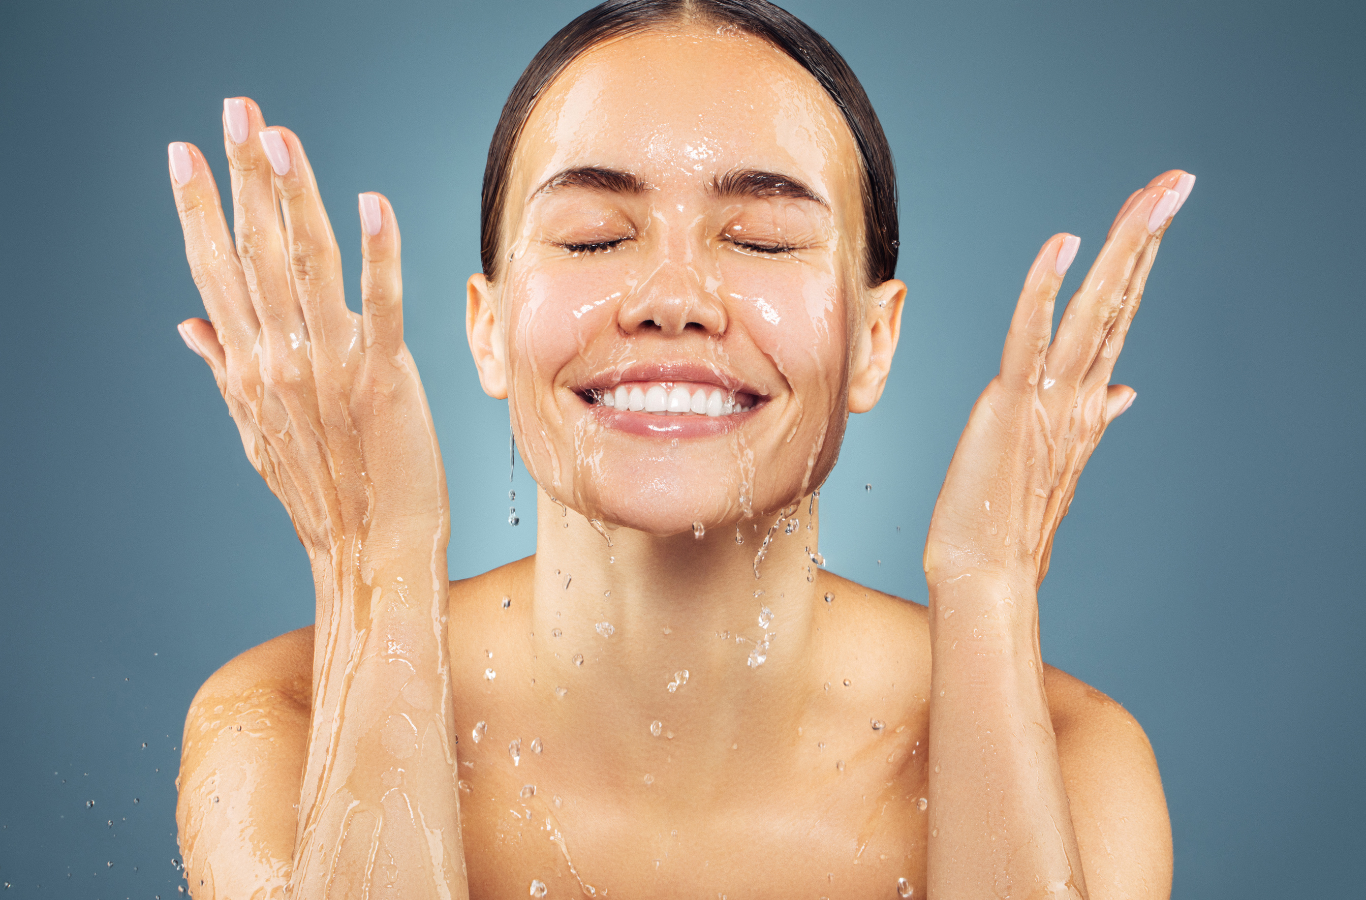 6 Tips To Keeping Your Skin Hydrated & Looking Healthy